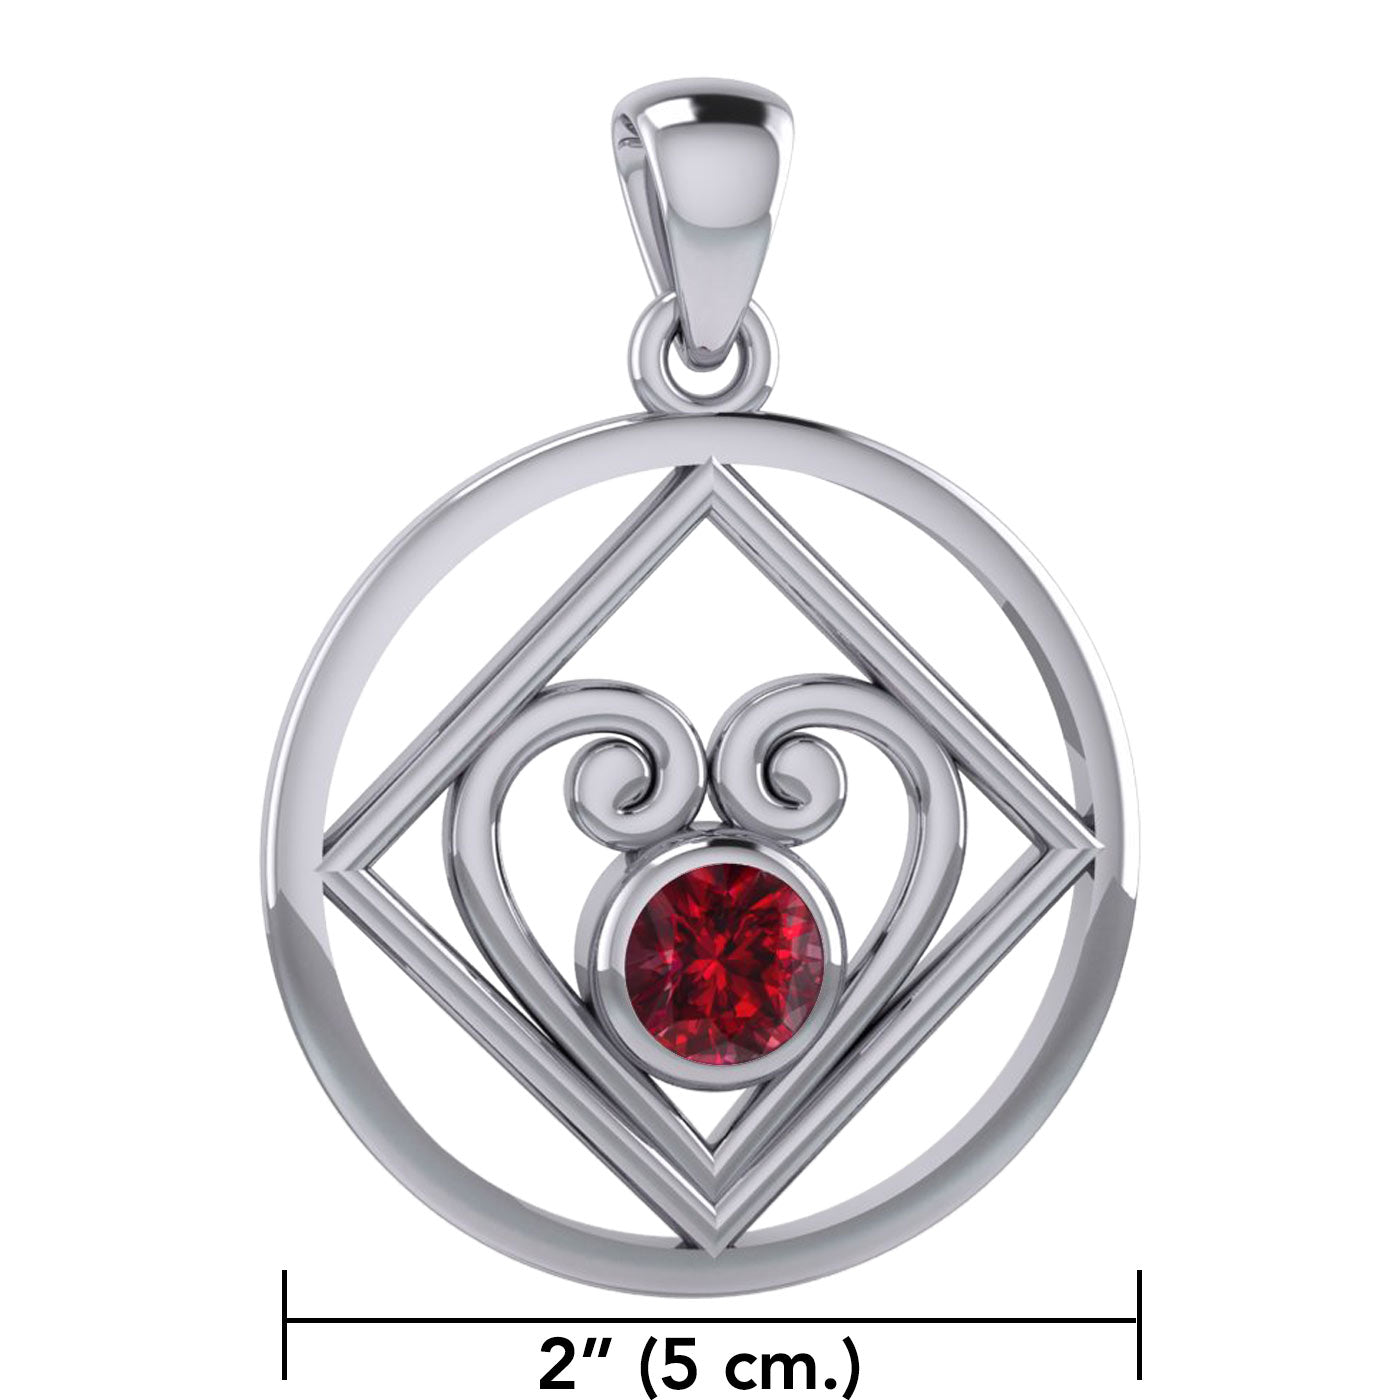 Large NA Recovery with Heart of Power Silver Pendant TPD6006